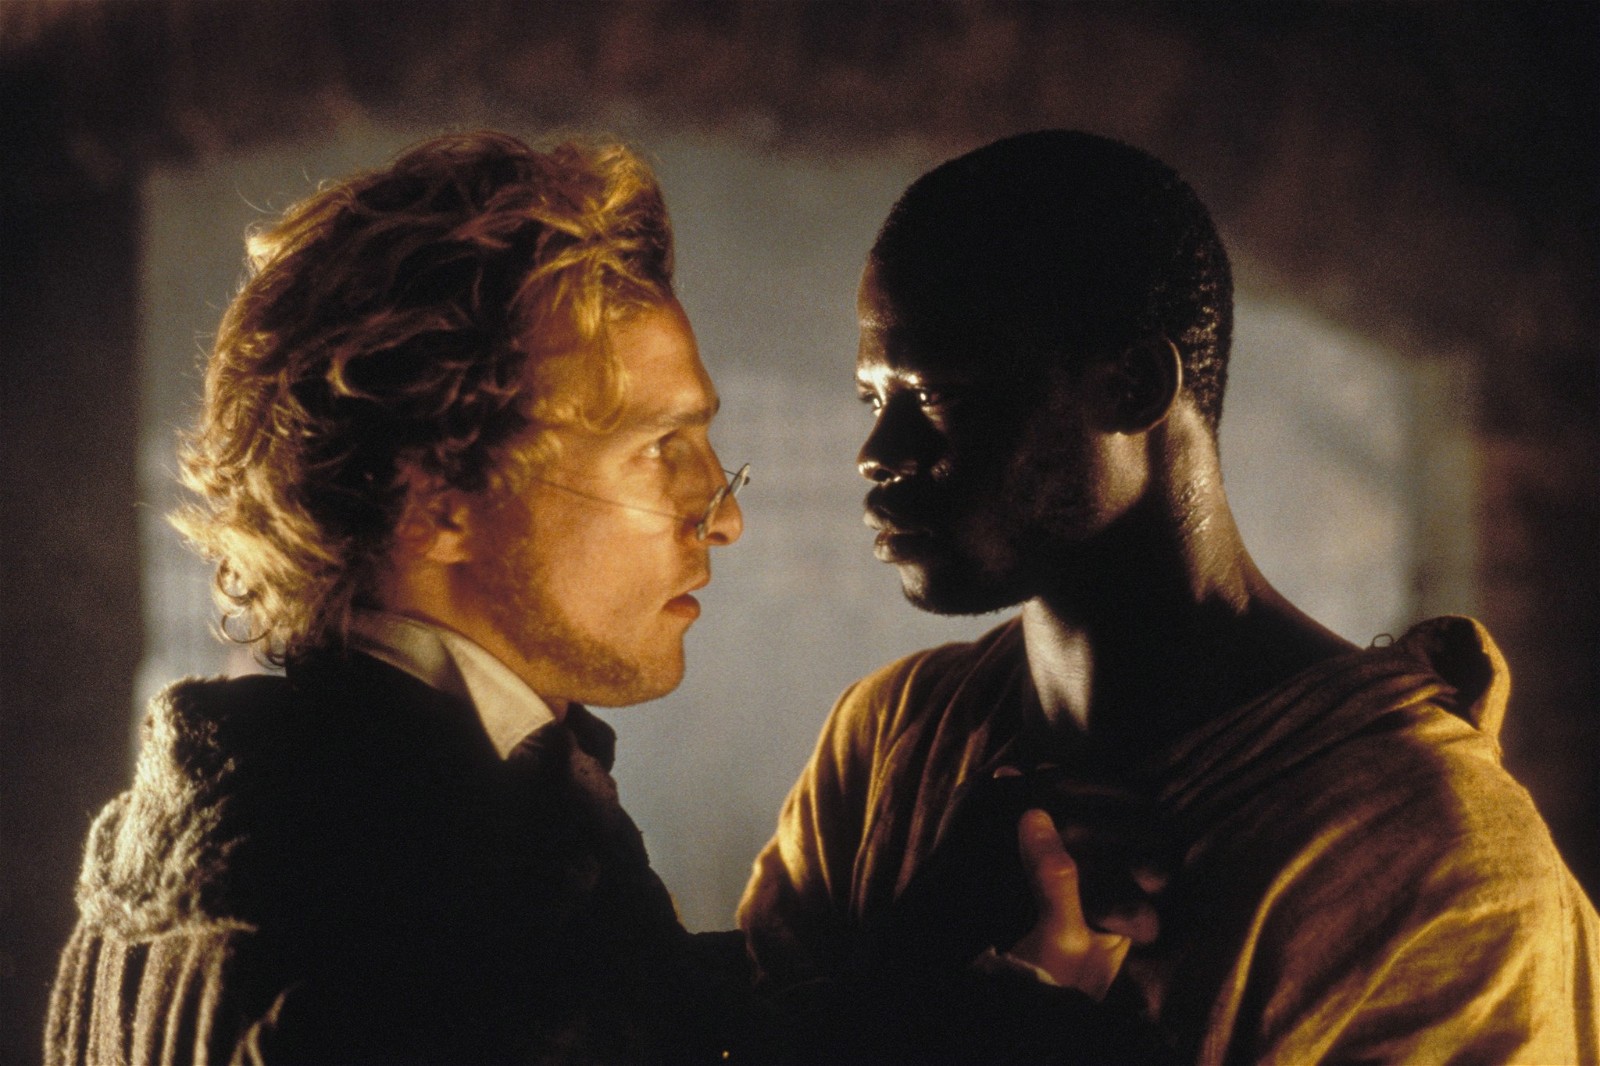 Matthew McConaughey and Djimon Hounsou in Amistad [Credit DreamWorks Pictures]